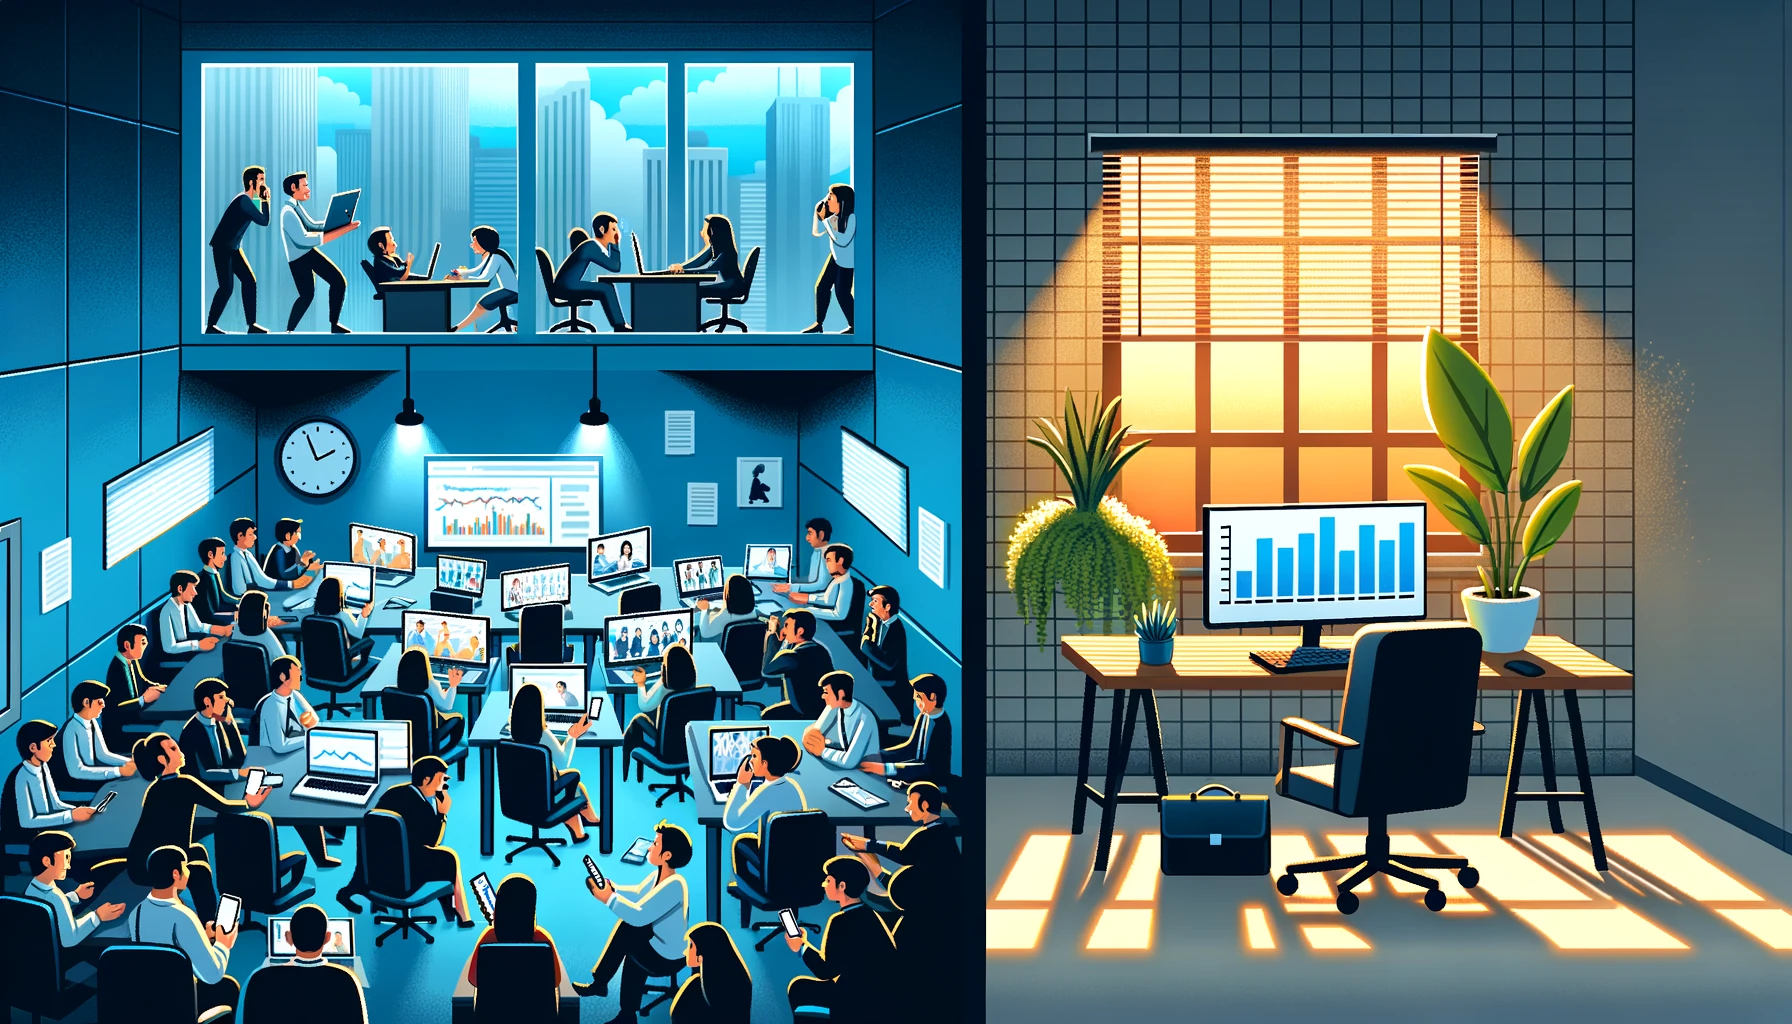 Vector of a Contrast Between Work Environments: On the left, a chaotic office scene with employees crammed together, phones ringing non-stop, and several screens displaying video conference calls with multiple participants. On the right, a serene home office setup bathed in soft light, with a desk, a comfortable chair, a laptop, and a potted plant. A clear dividing line between the two environments emphasizes the stark contrast.